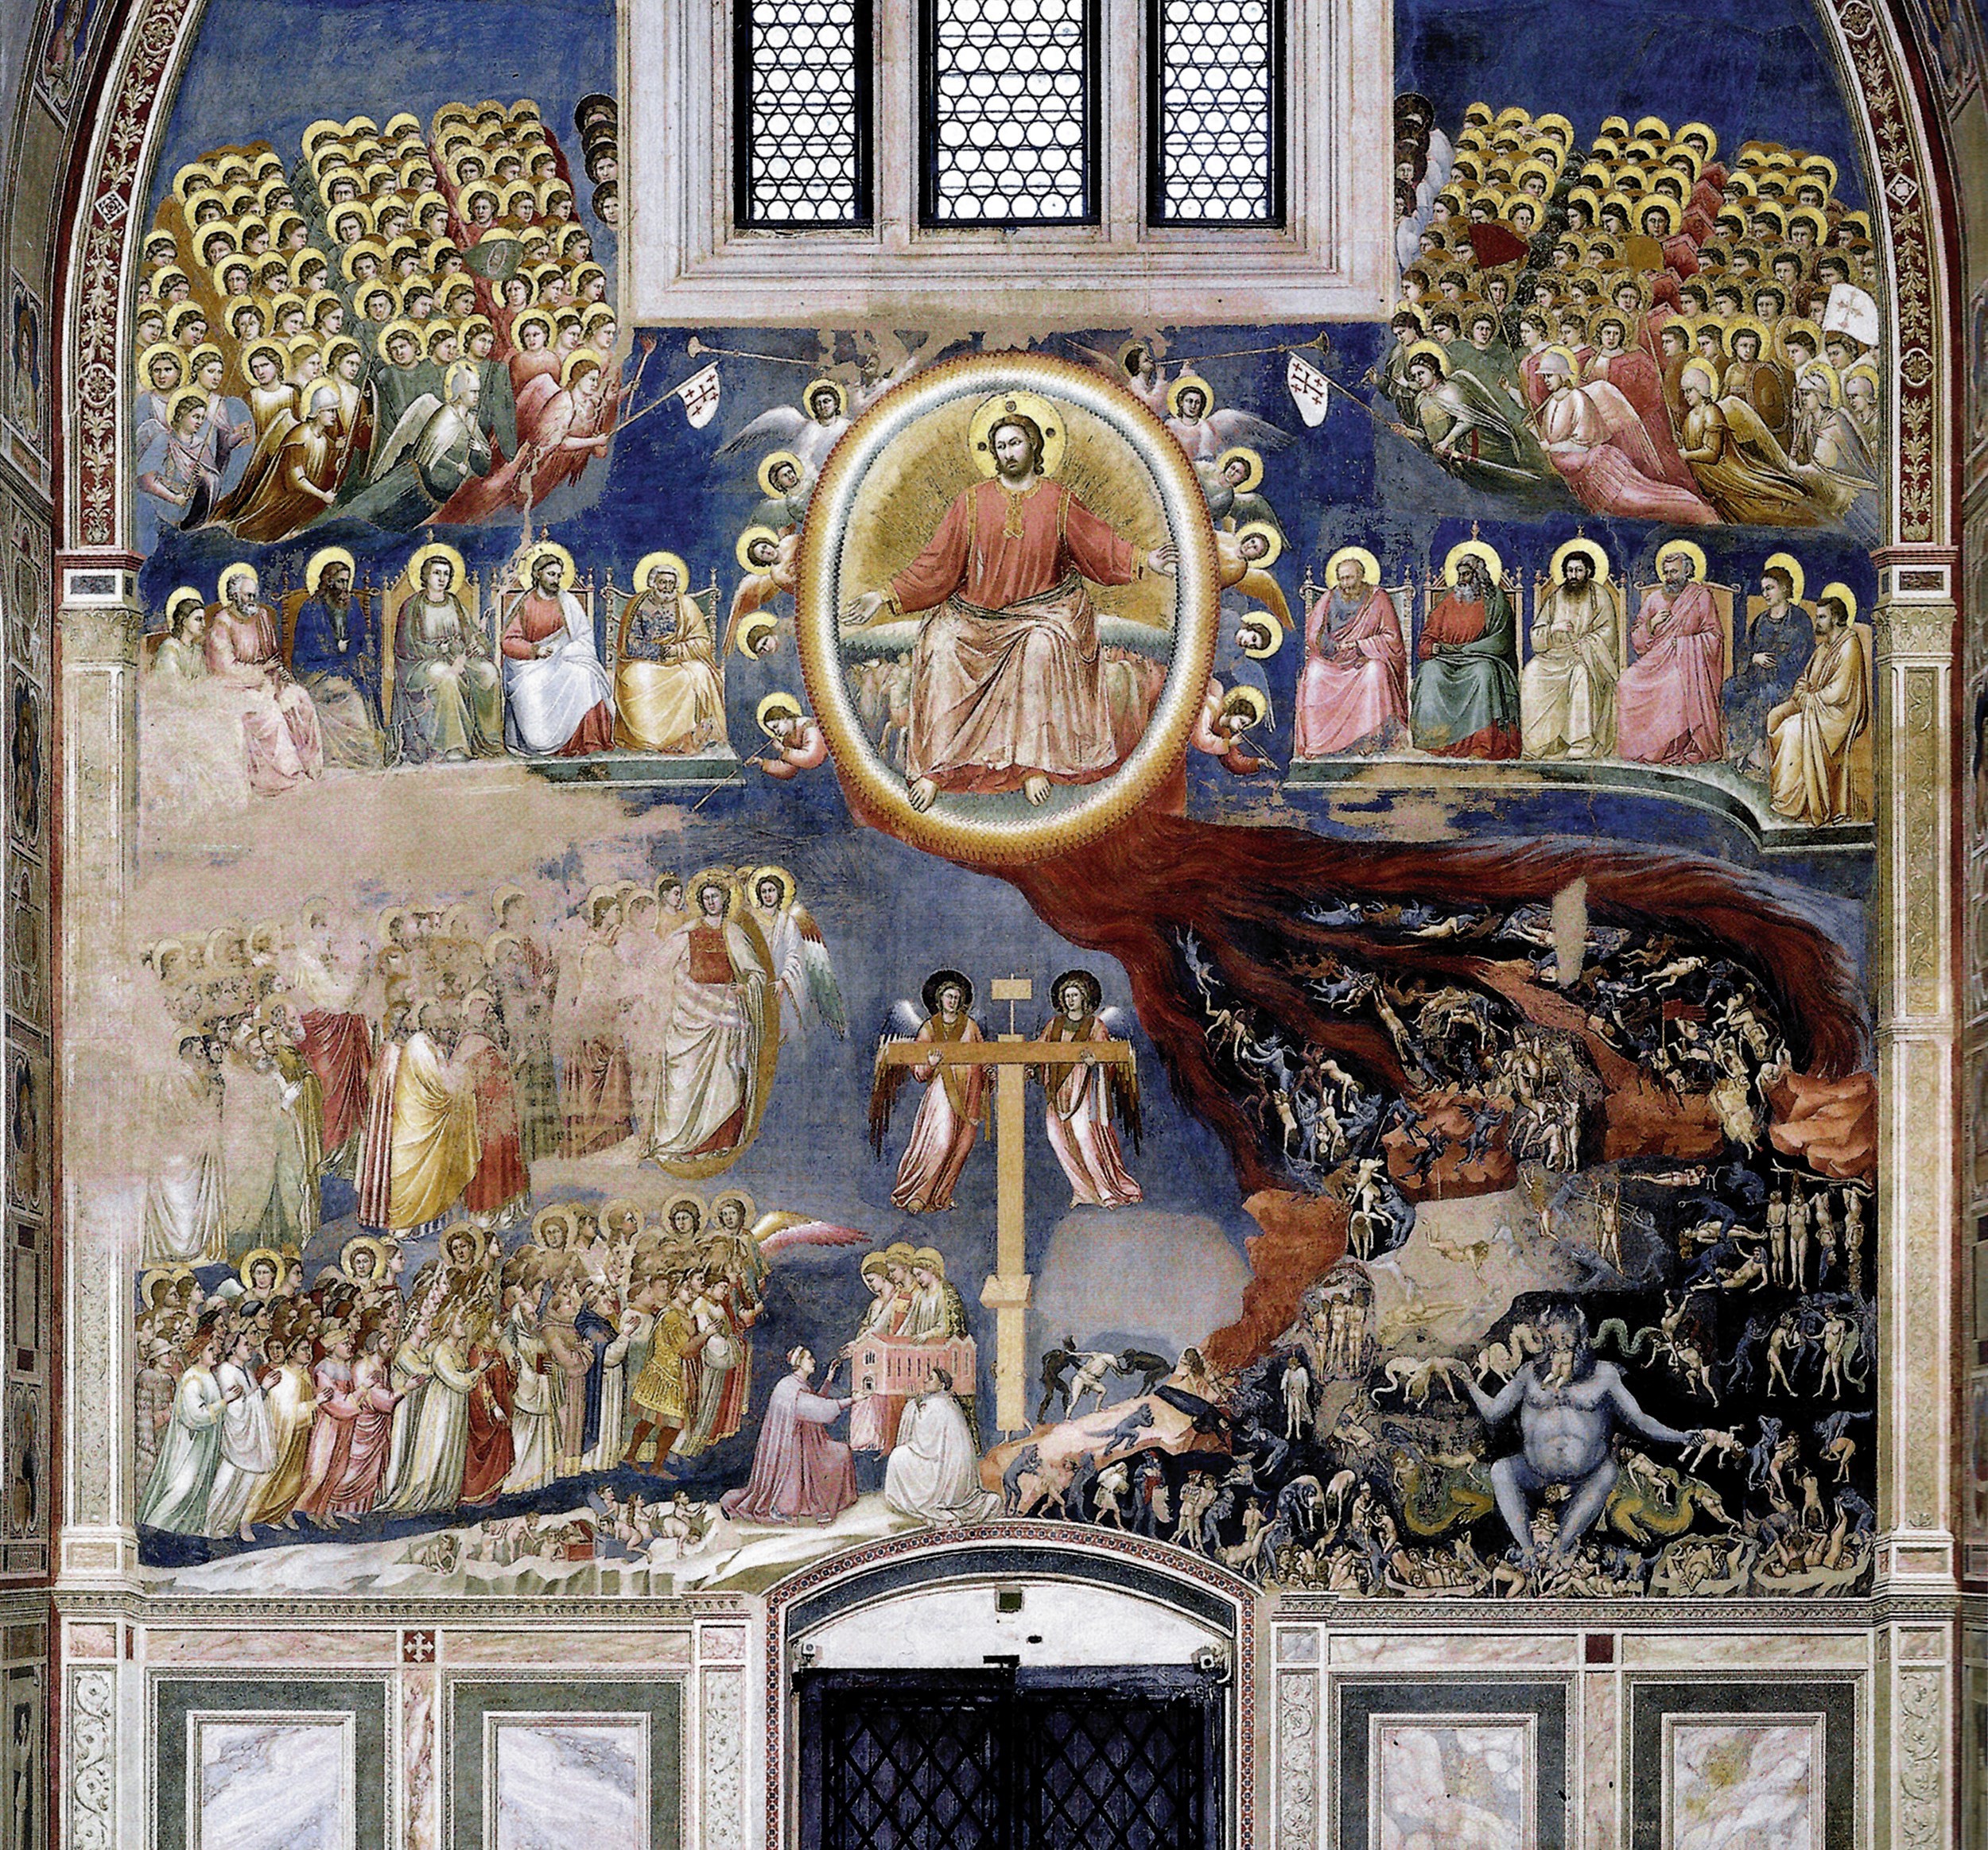 The Last Judgement by Giotto (Illustration) - World History Encyclopedia